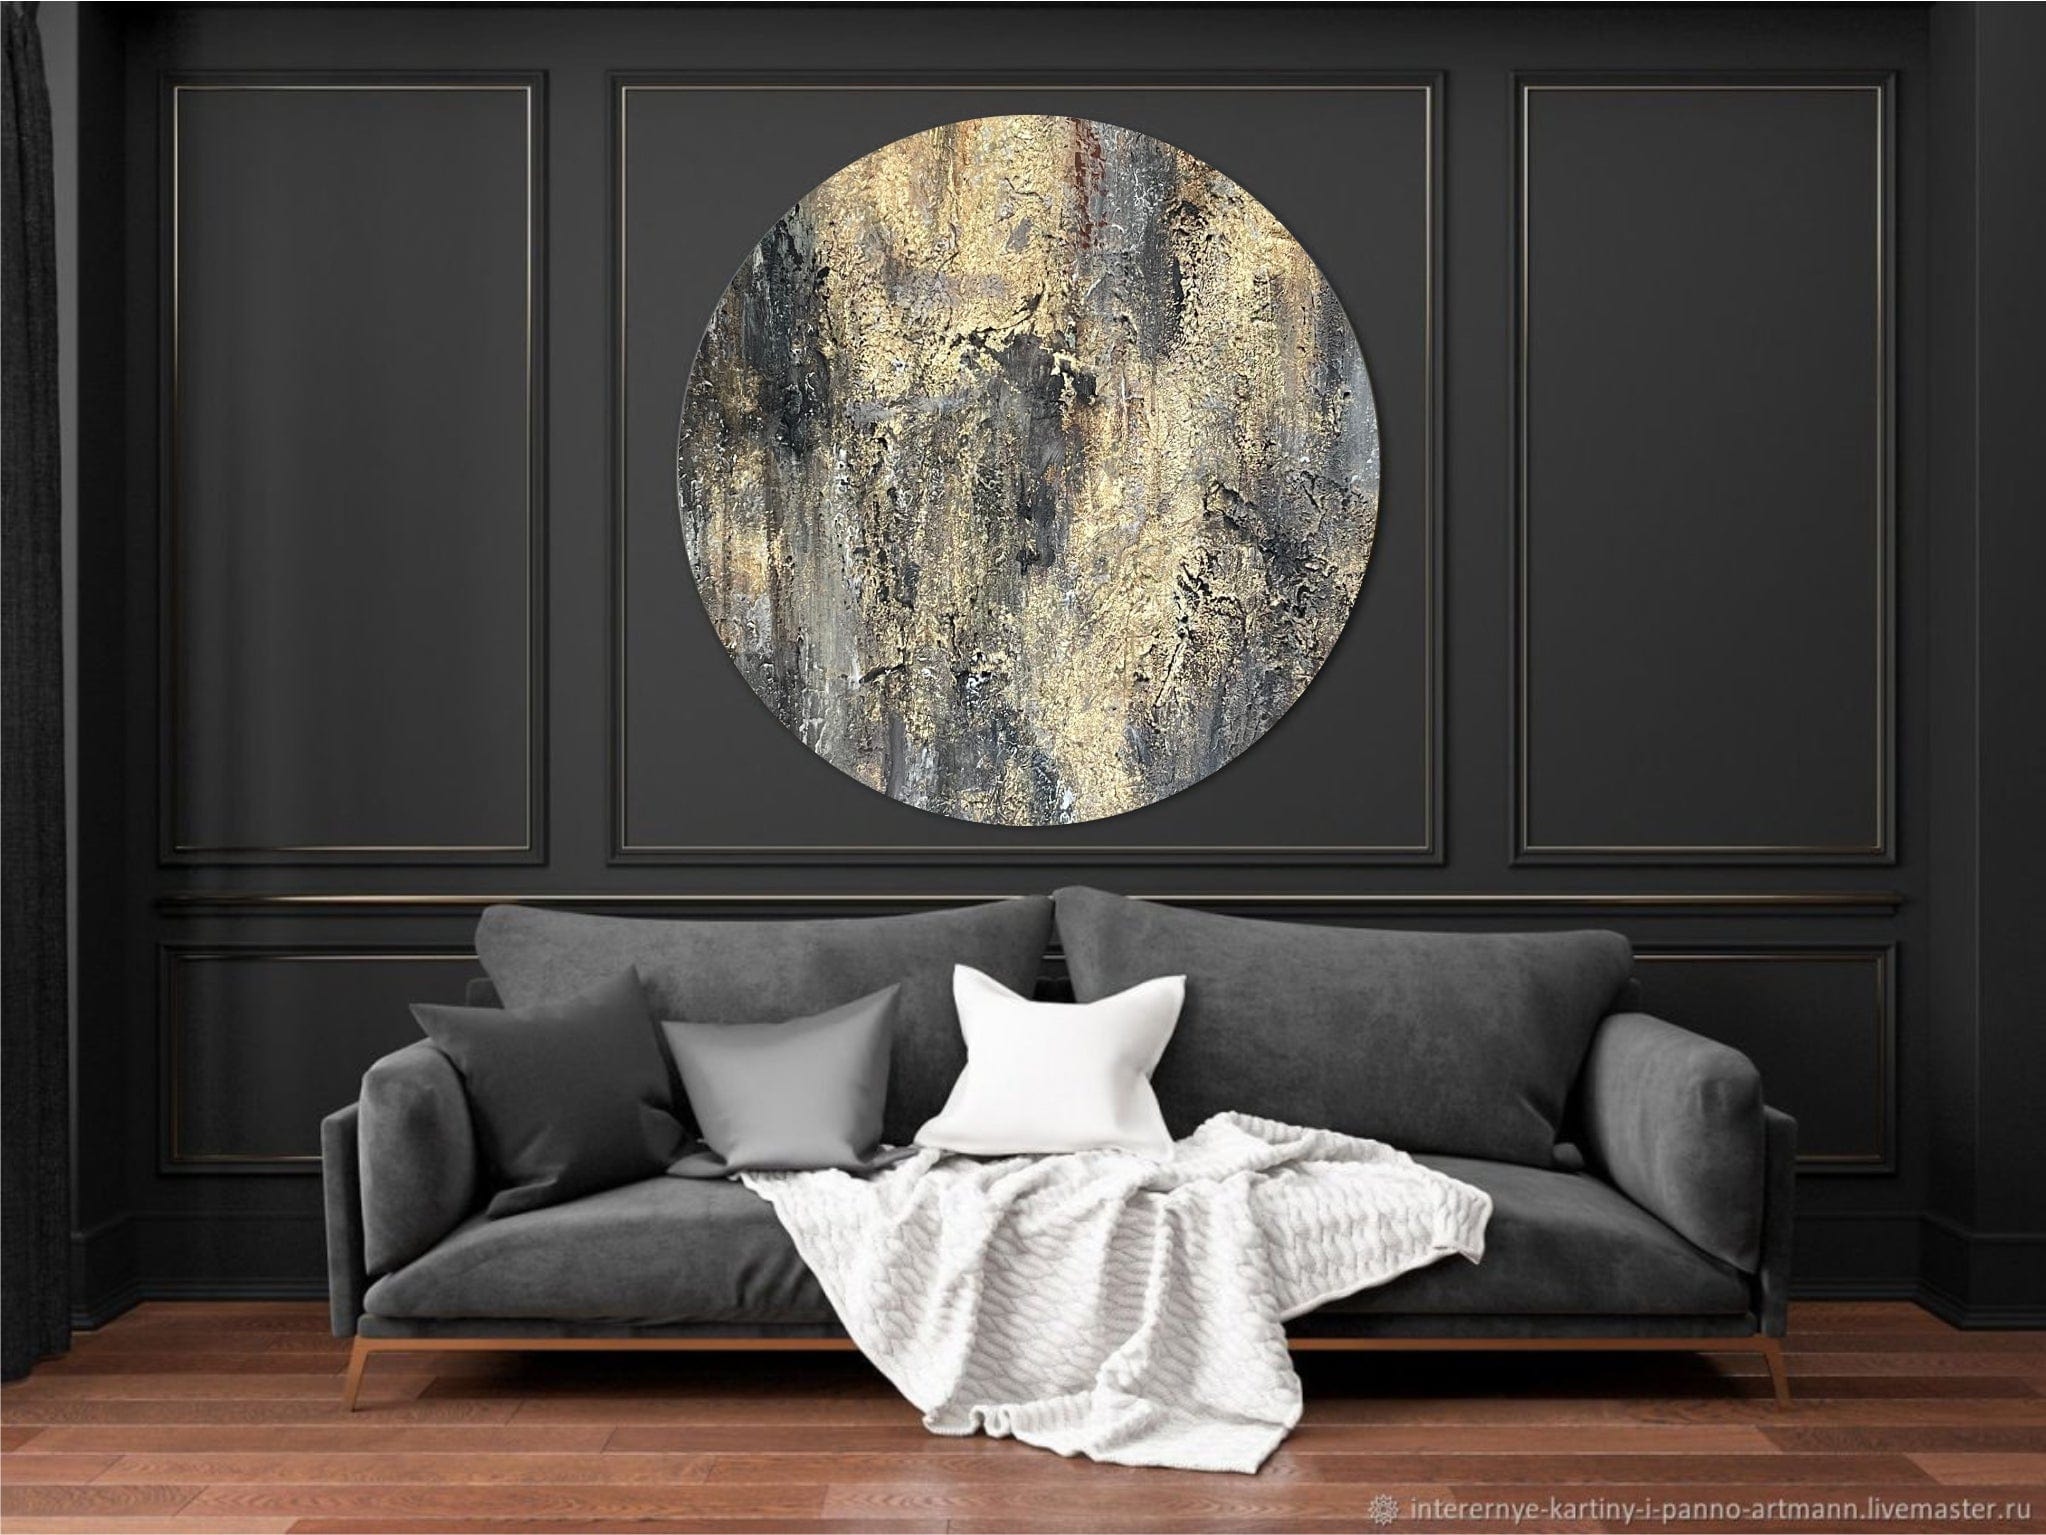 Large Original Oil Painting Circle Painting Black Canvas Abstract Gold